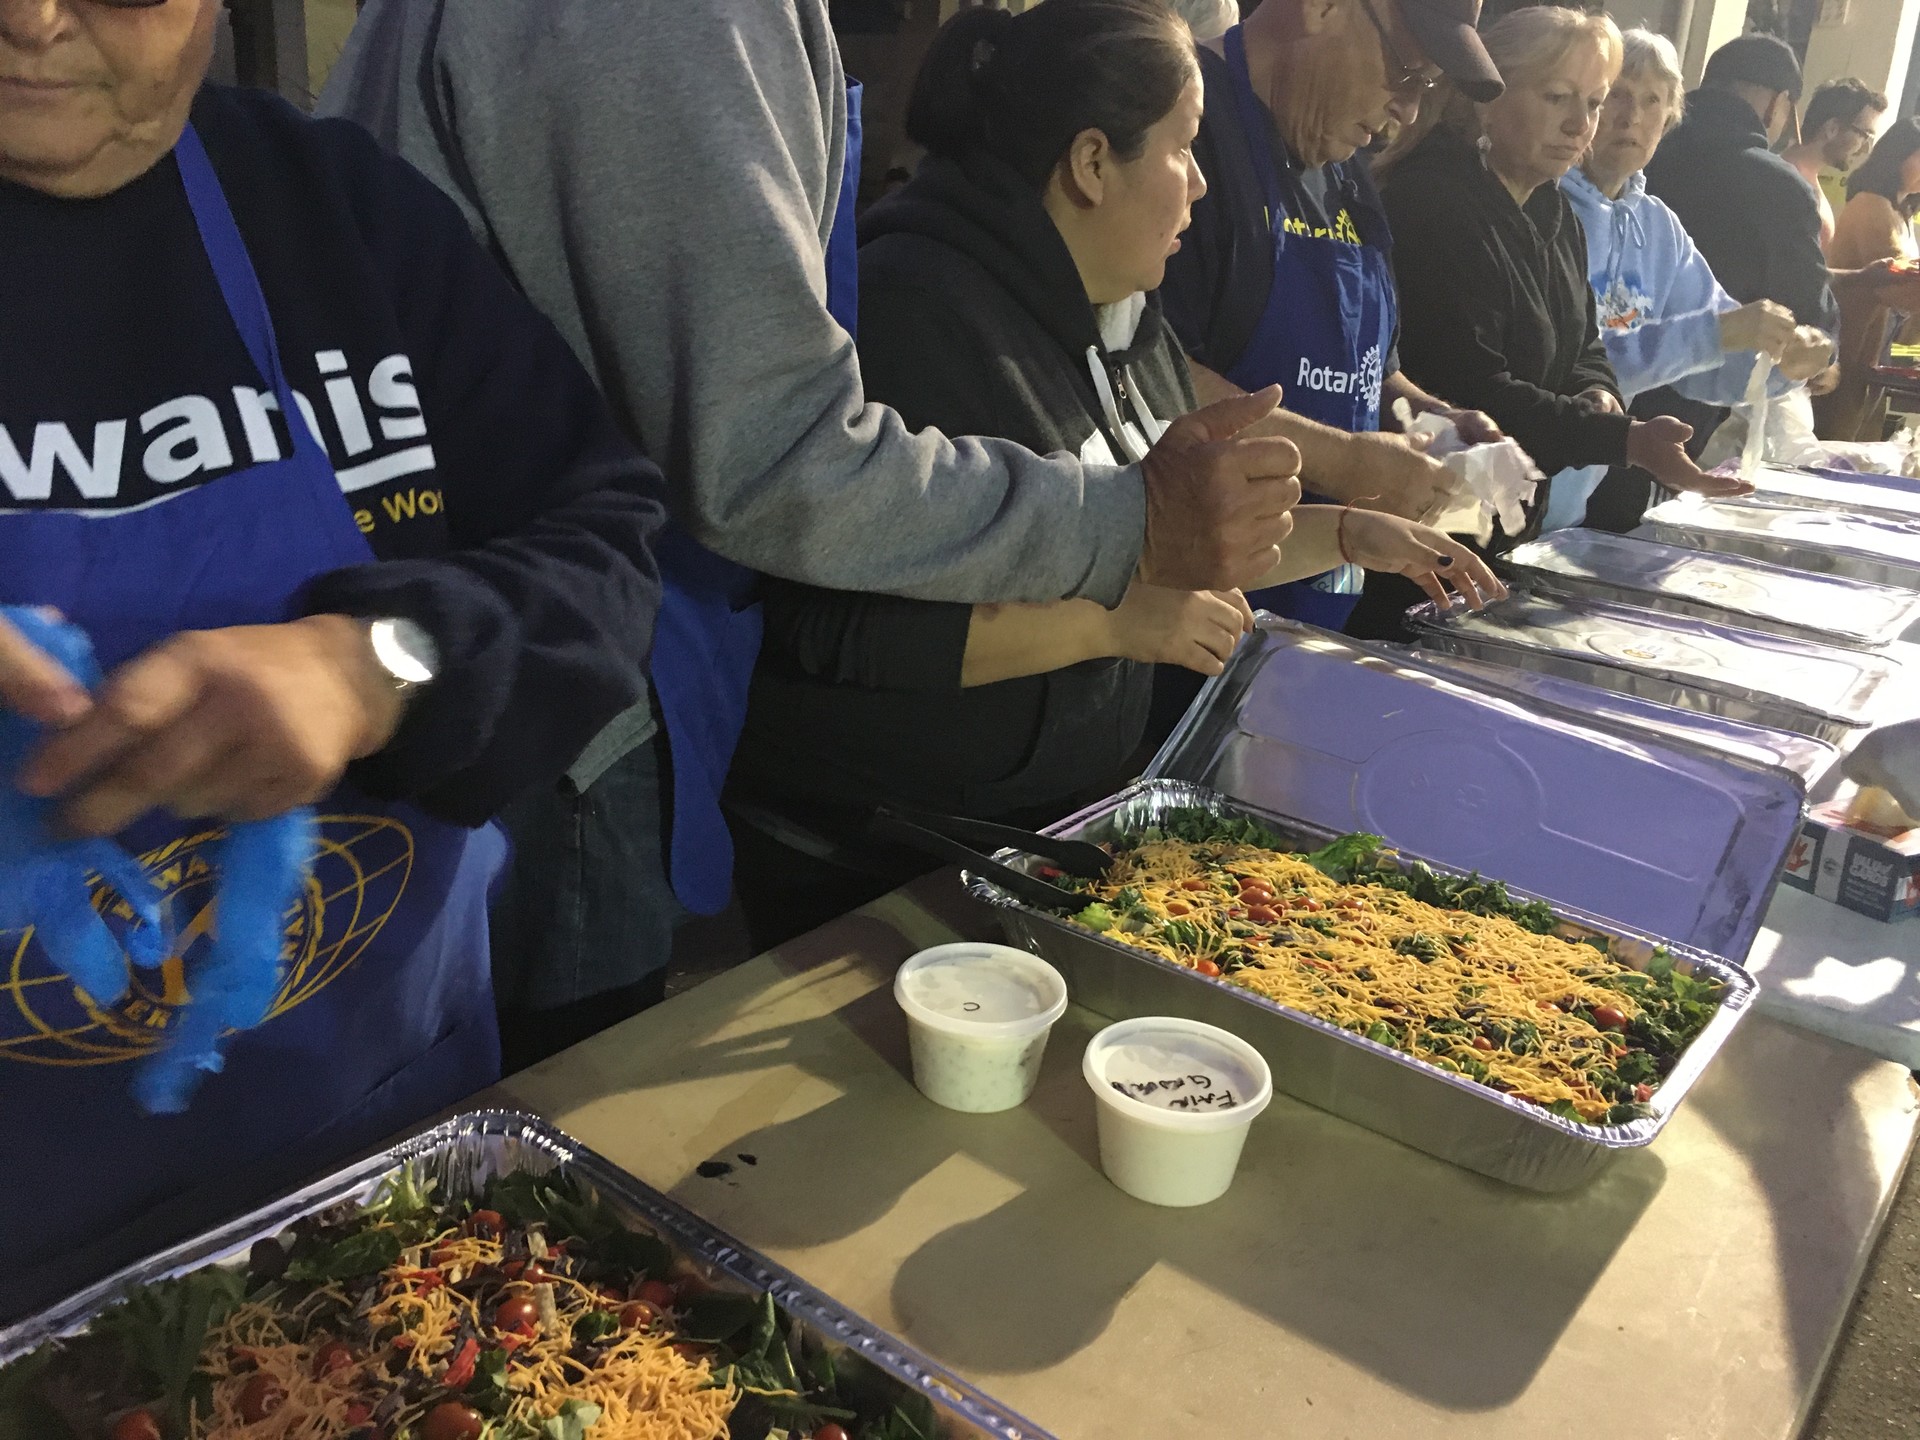 Members of the local for Kiwanis International volunteered to serve dinner for World Central Kitchen at the Cloverdale Citrus Fairgrounds as the Kincade Fire raged in Sonoma County.